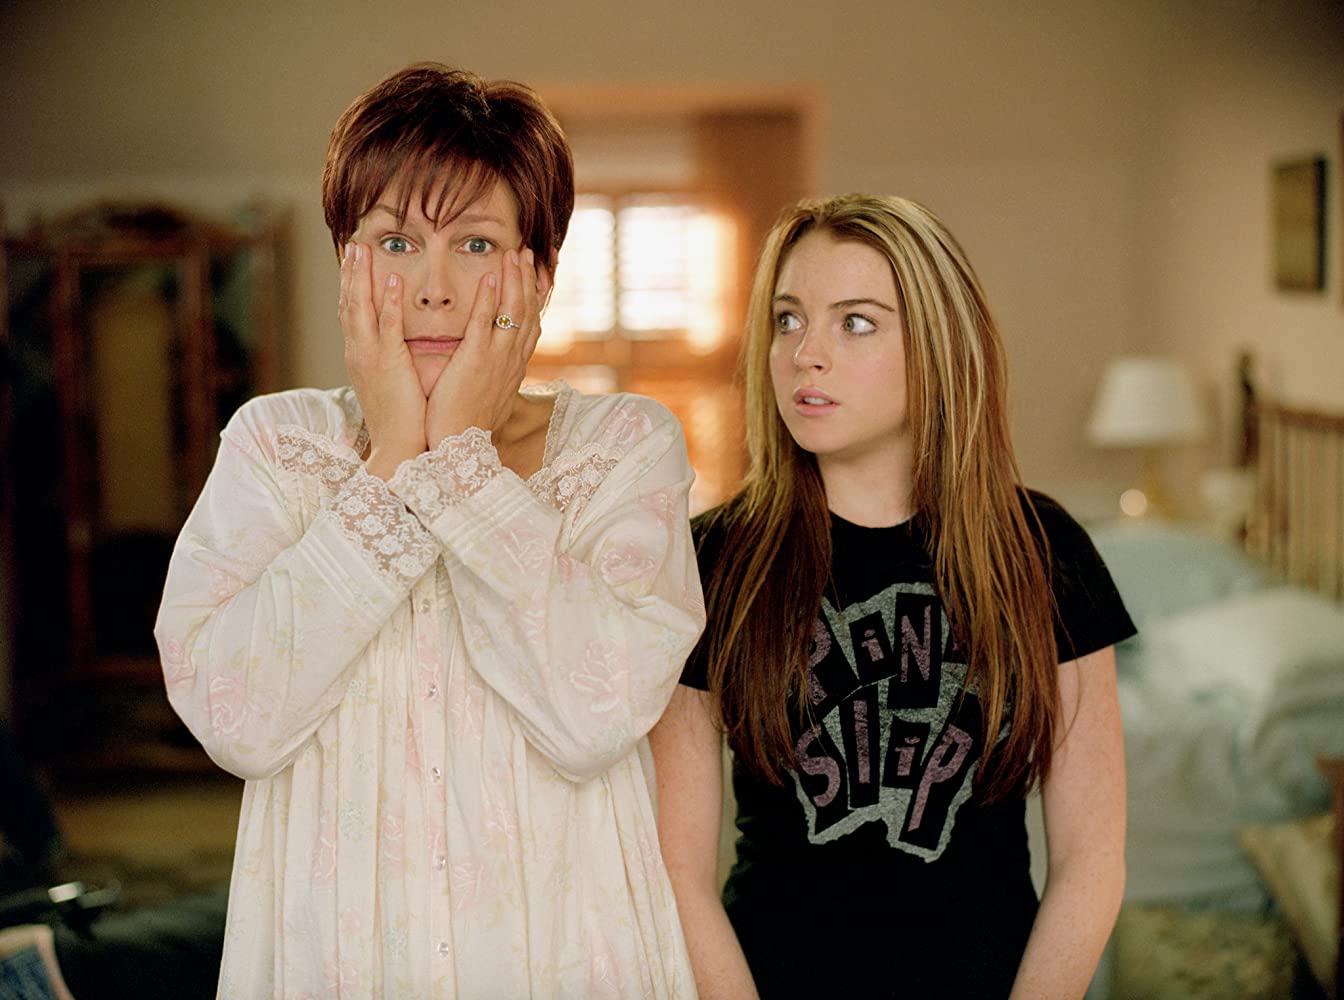 Jamie Lee Curtis clutches her face while Lindsay Lohan looks on in a screenshot from Freaky Friday